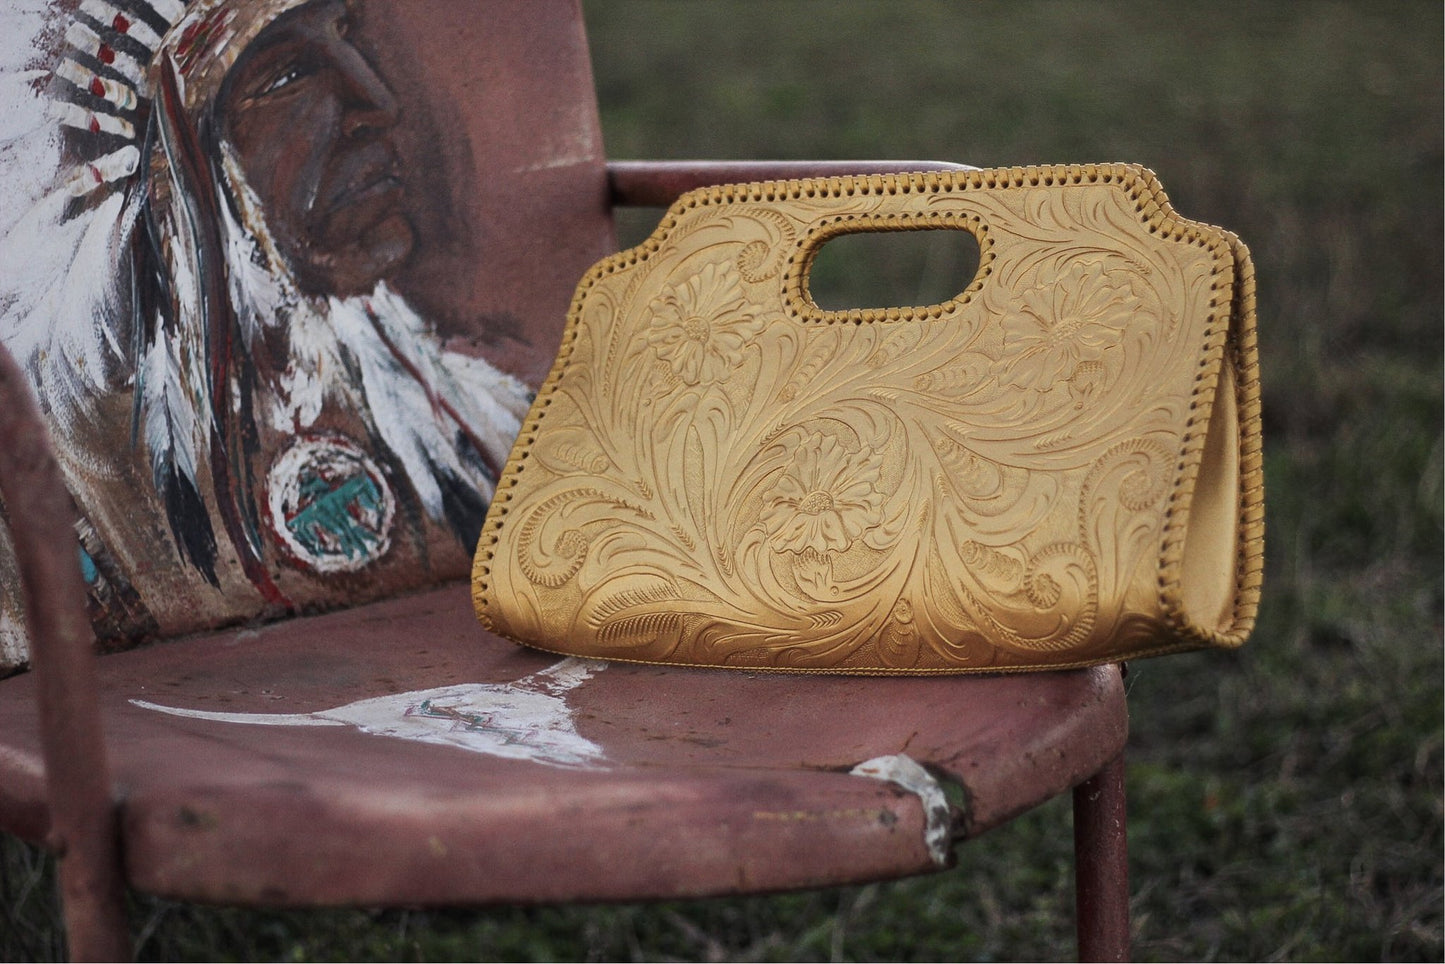 Floral Tooled Leather Clutch - Choice of Colors - clutch, cowgirl, gift, handbag, leather, made in the usa, madeintheusa, MADEINUSA, Printed in USA, purse, southwestern, tooled, turquoise, usa, usa artisan, usa artist, usa made, usaartisan, usaartist, USAMADE, western -  - Baha Ranch Western Wear